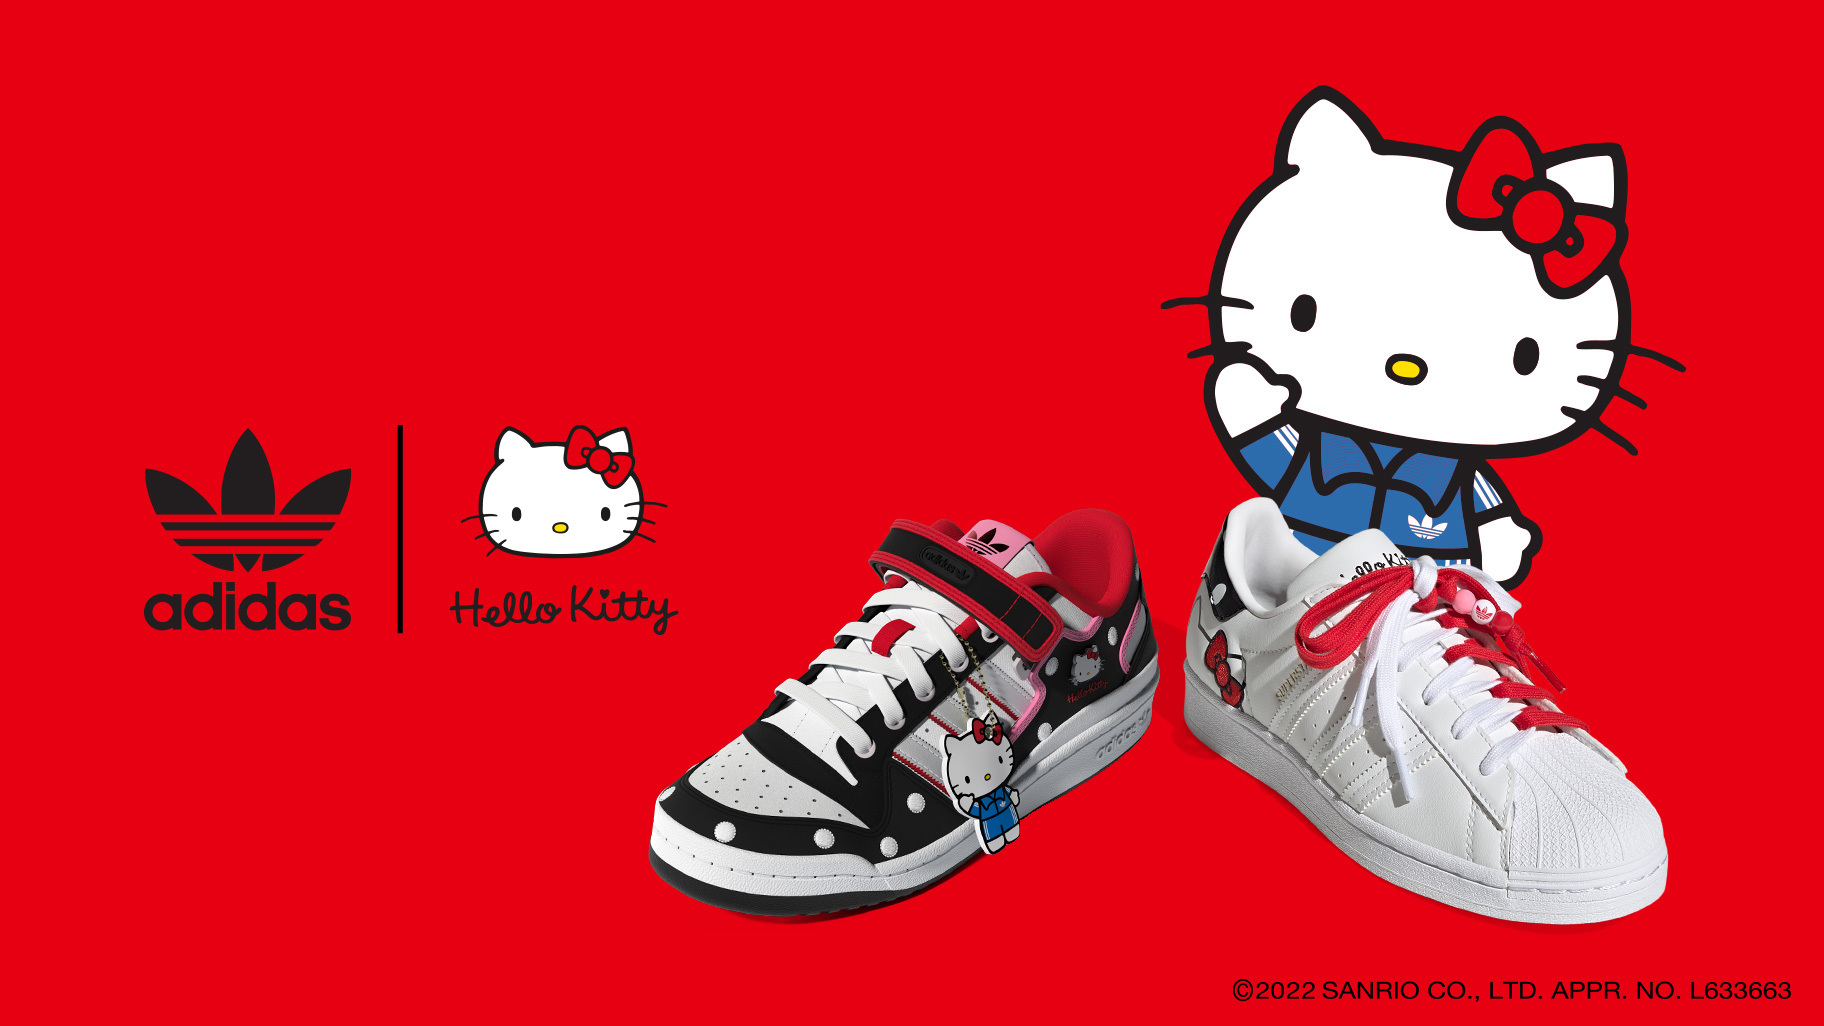 atleta celestial Foto Adidas releases an adorable Hello Kitty collection of sneakers and  accessories